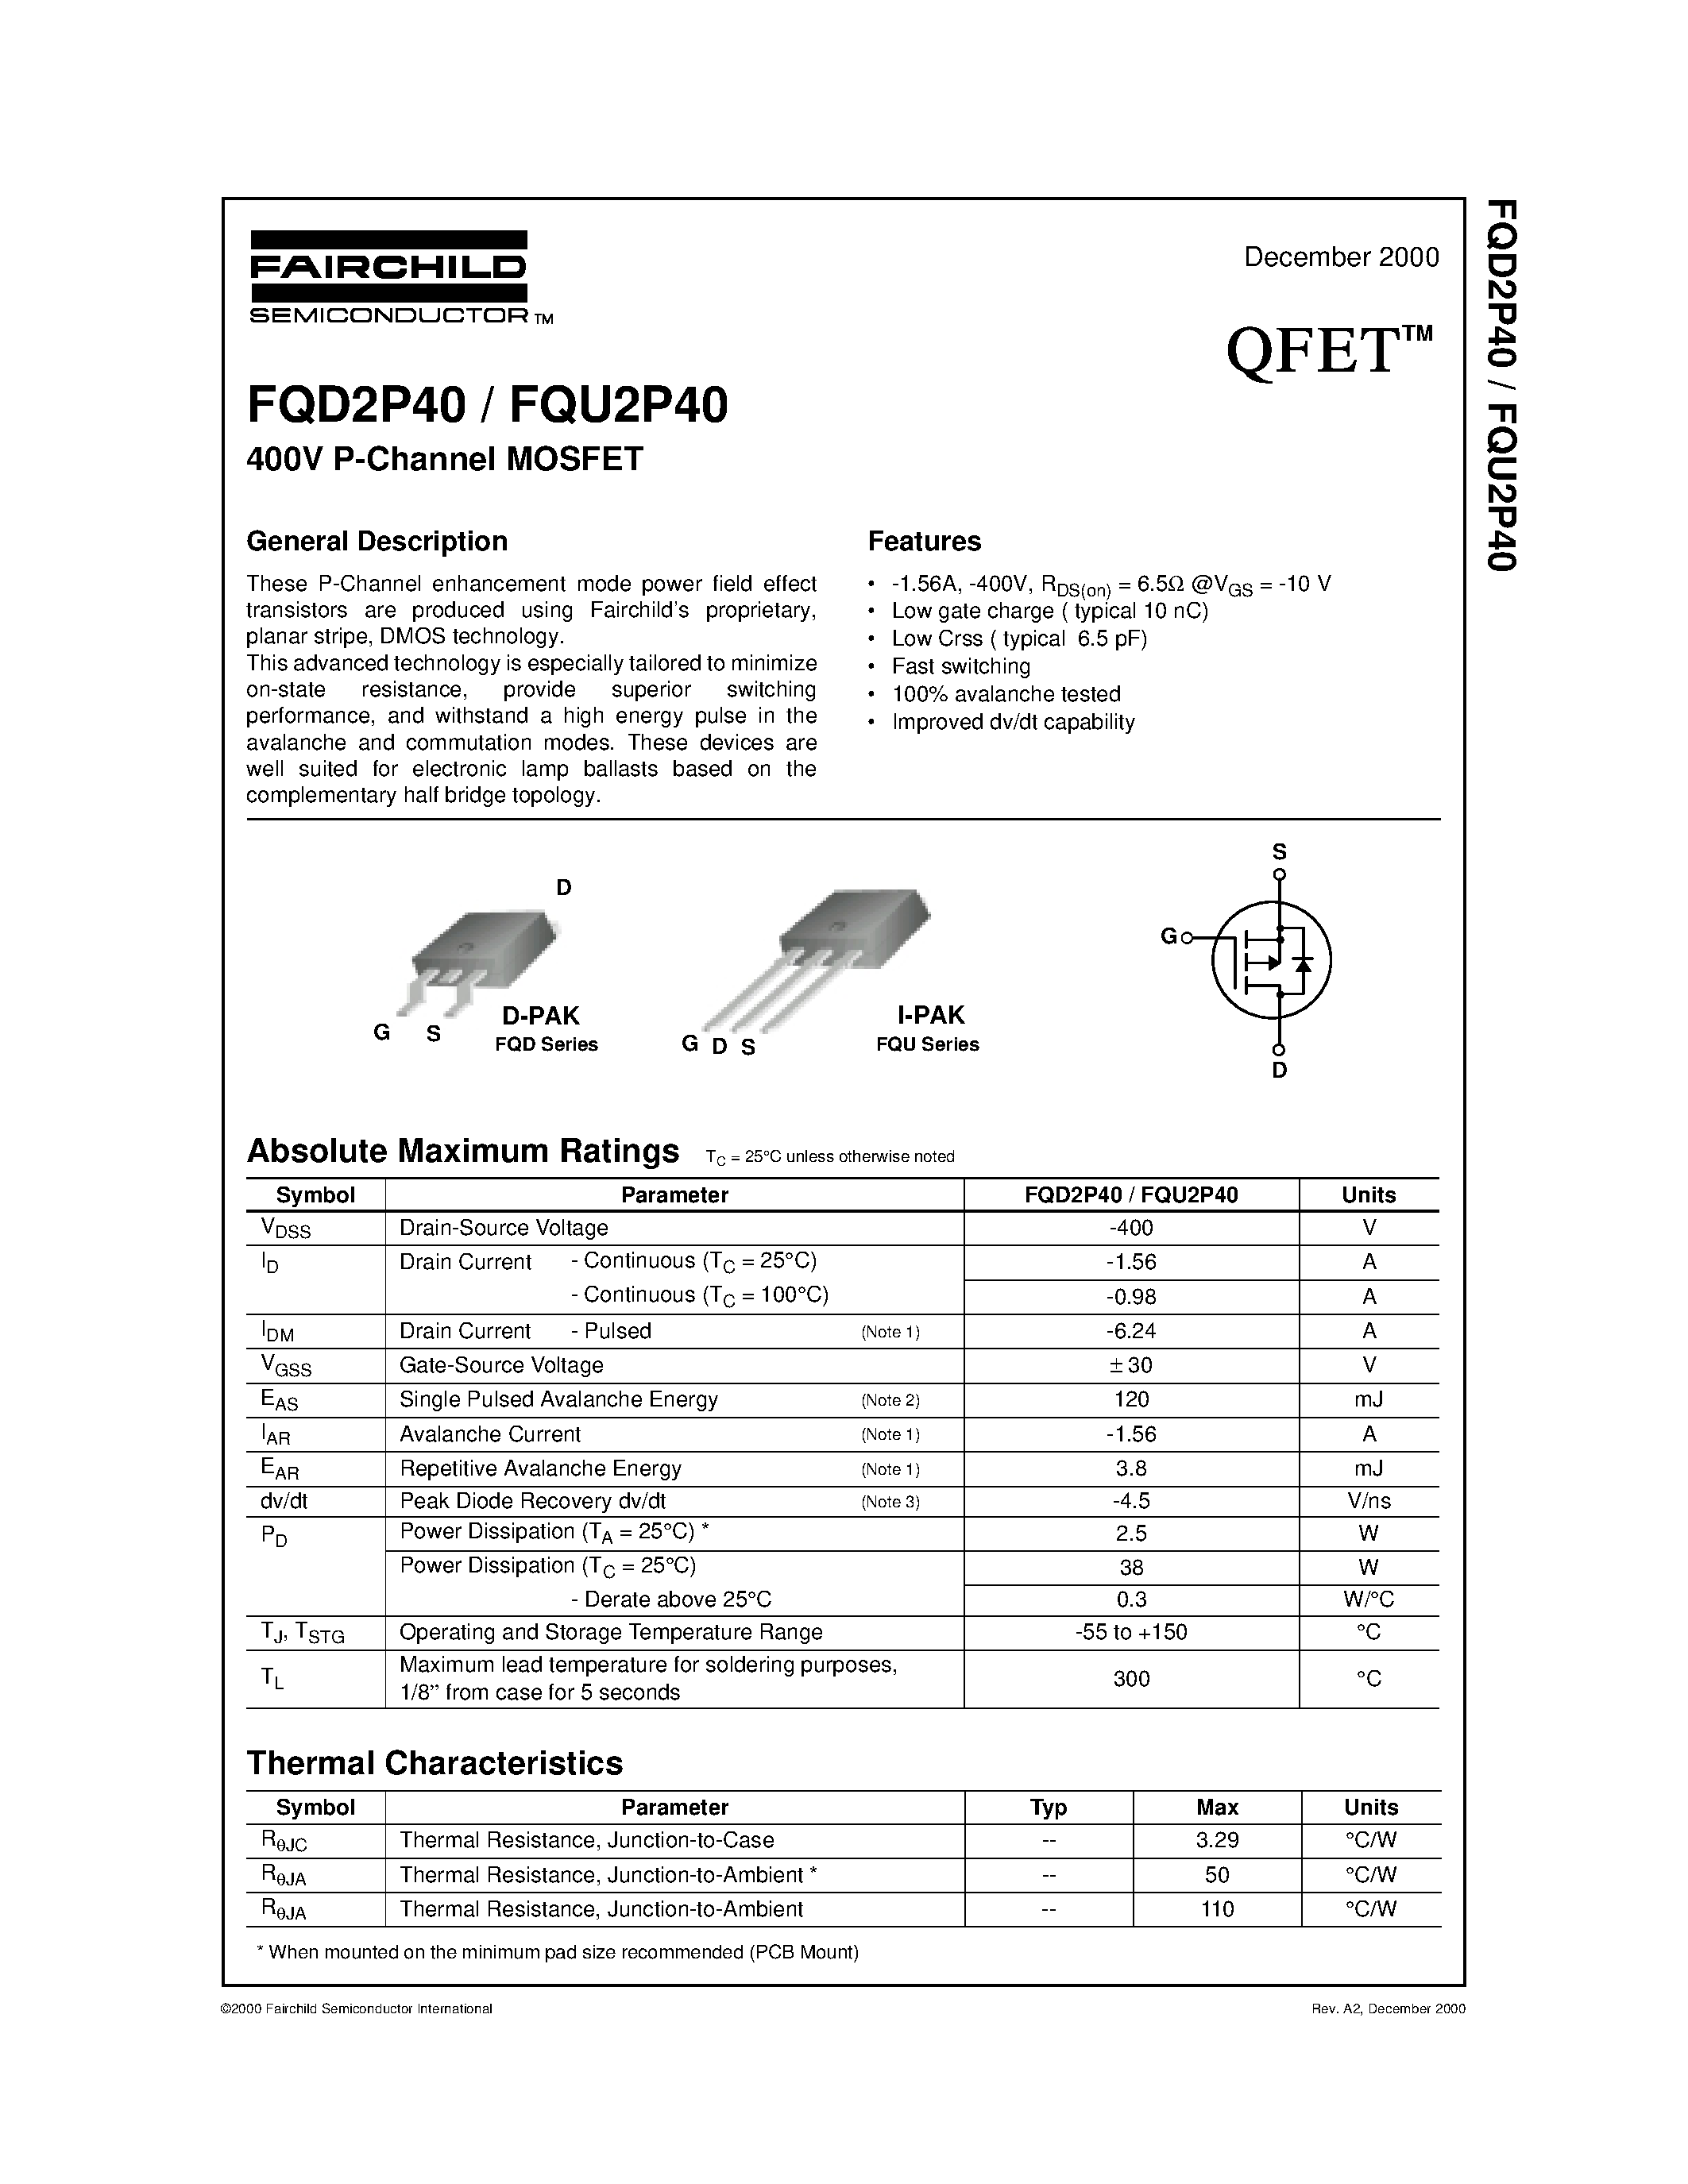 Datasheet FQD2P40 - 400V P-Channel MOSFET page 1